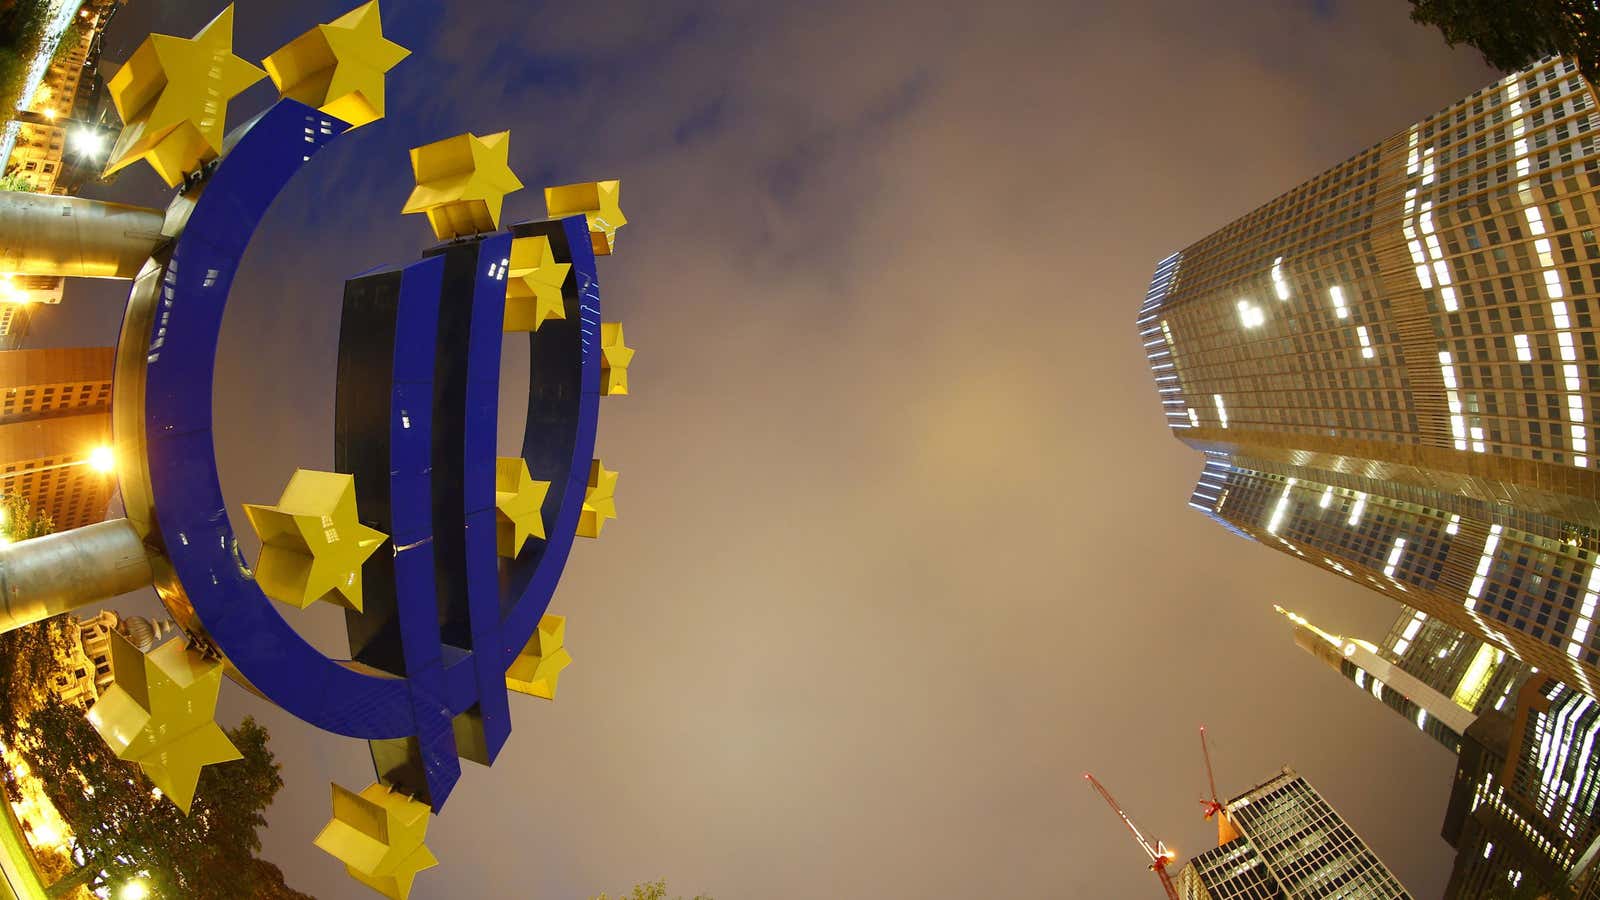 The world of European finance is topsy turvy right now.